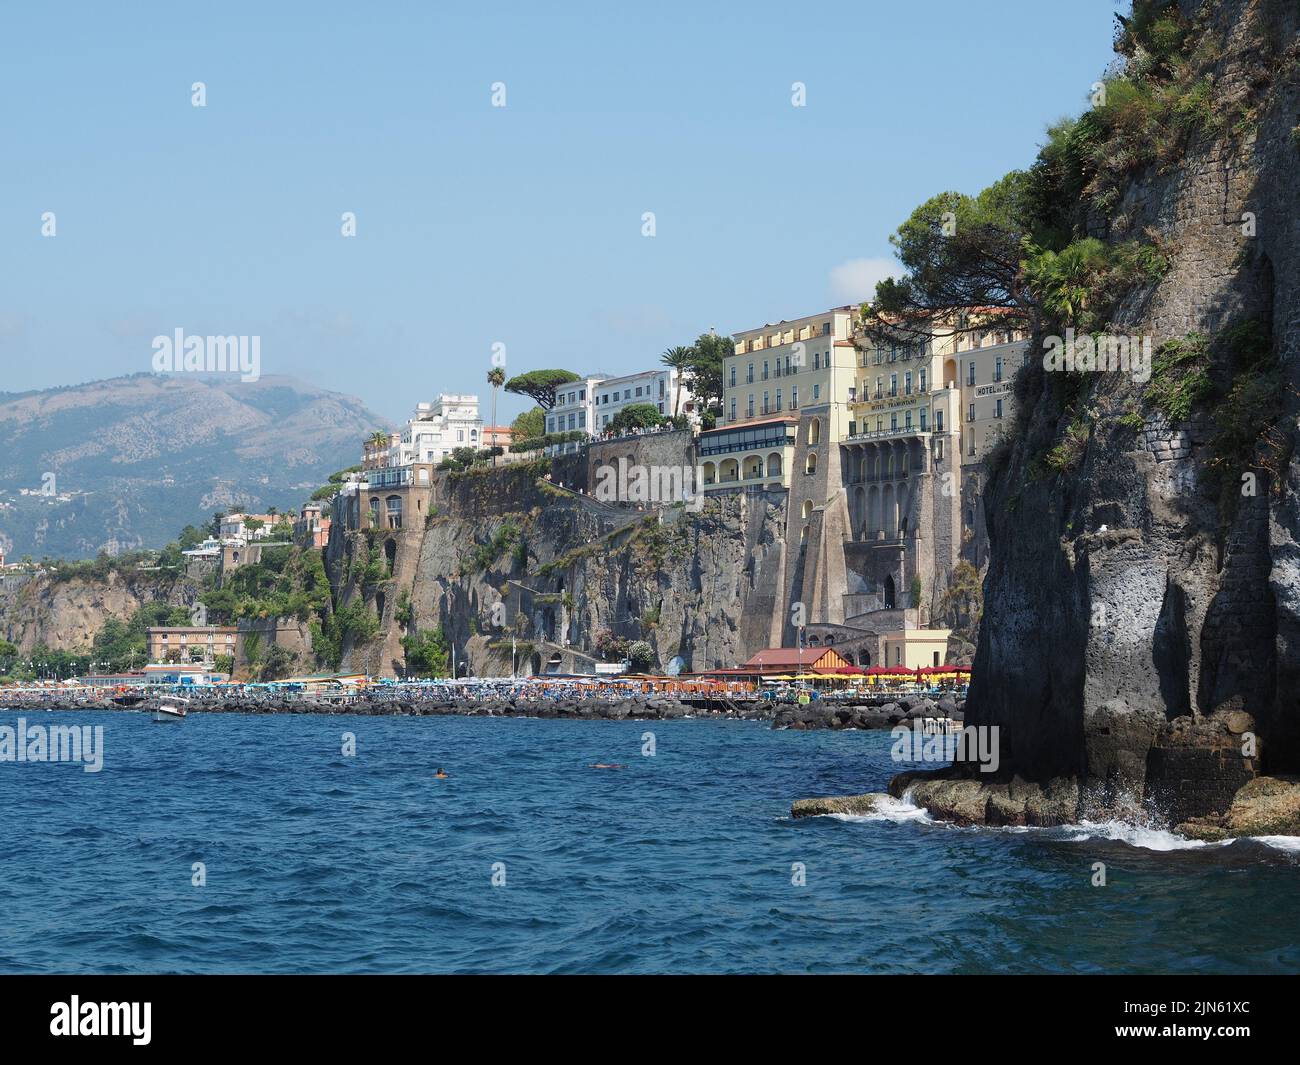 Sorrento seen from Marina Grande, Campania, Italy. The town itself is built on high and very steep cliffs, there is no beach but people use piers buil Stock Photo